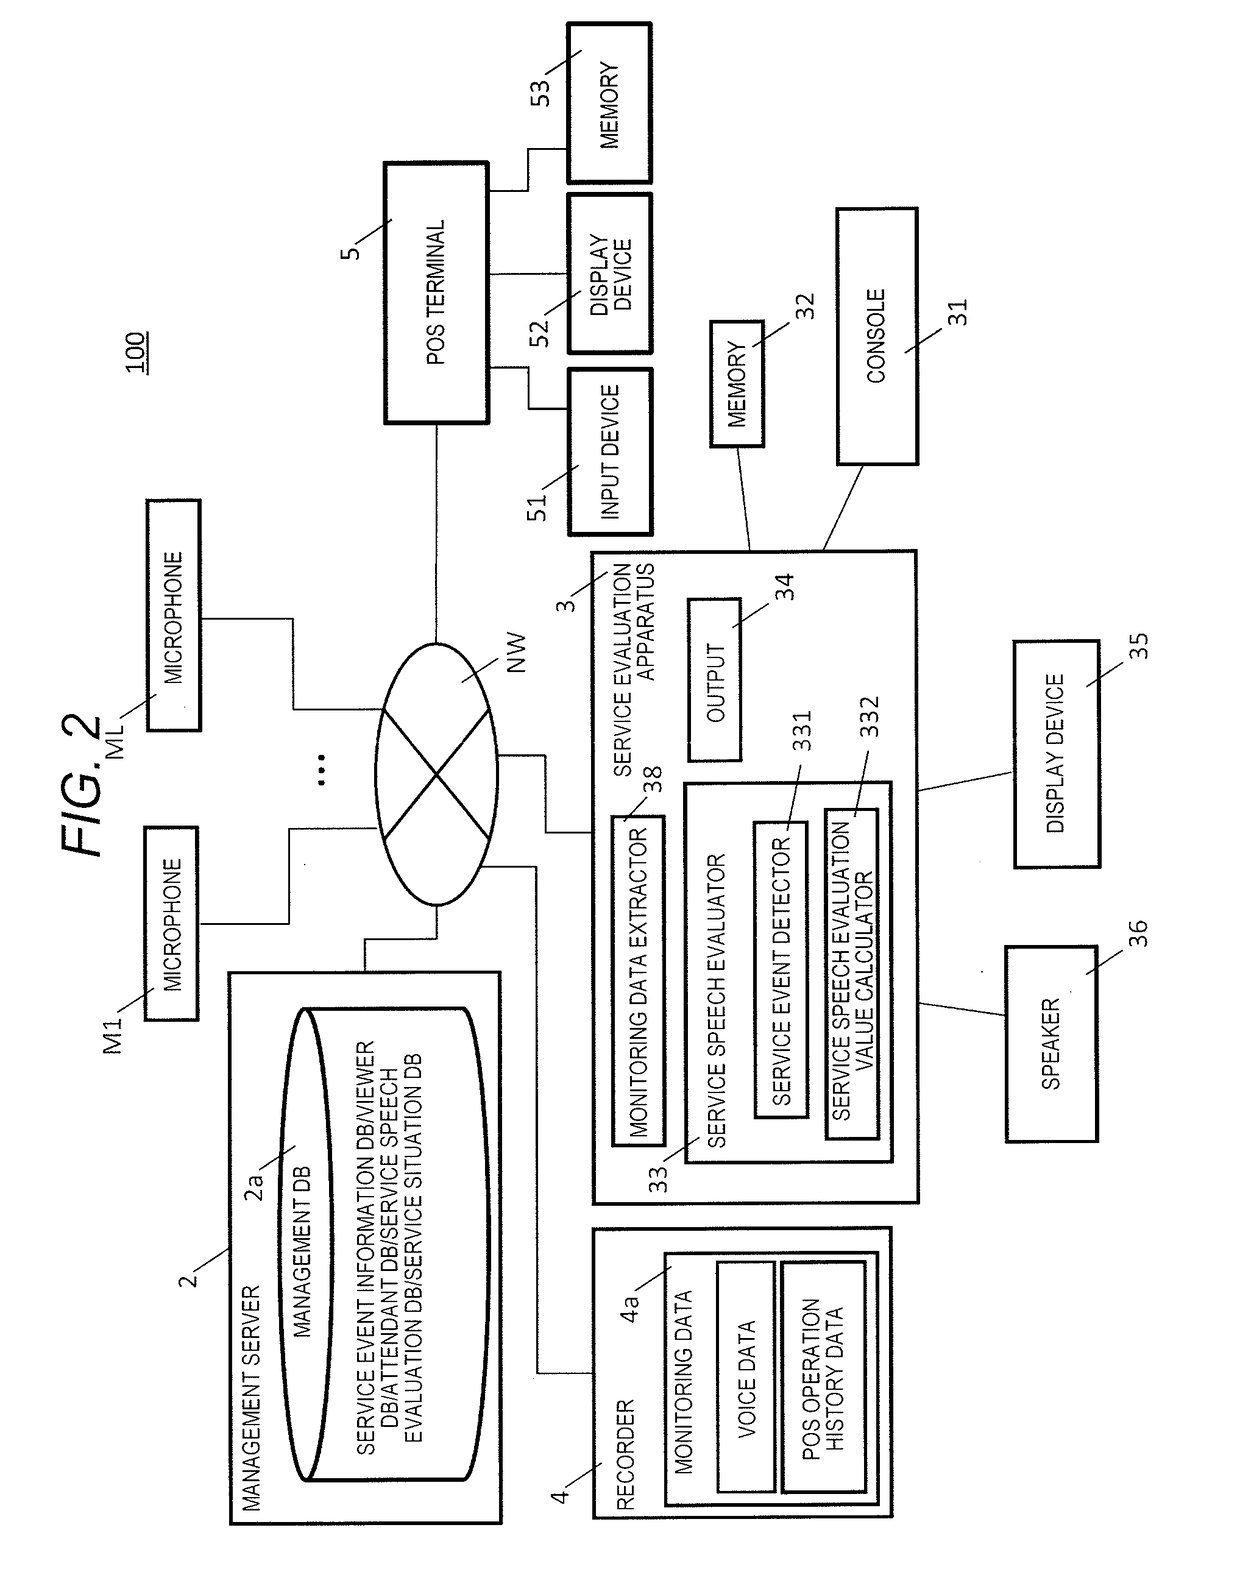 Service monitoring system and service monitoring method